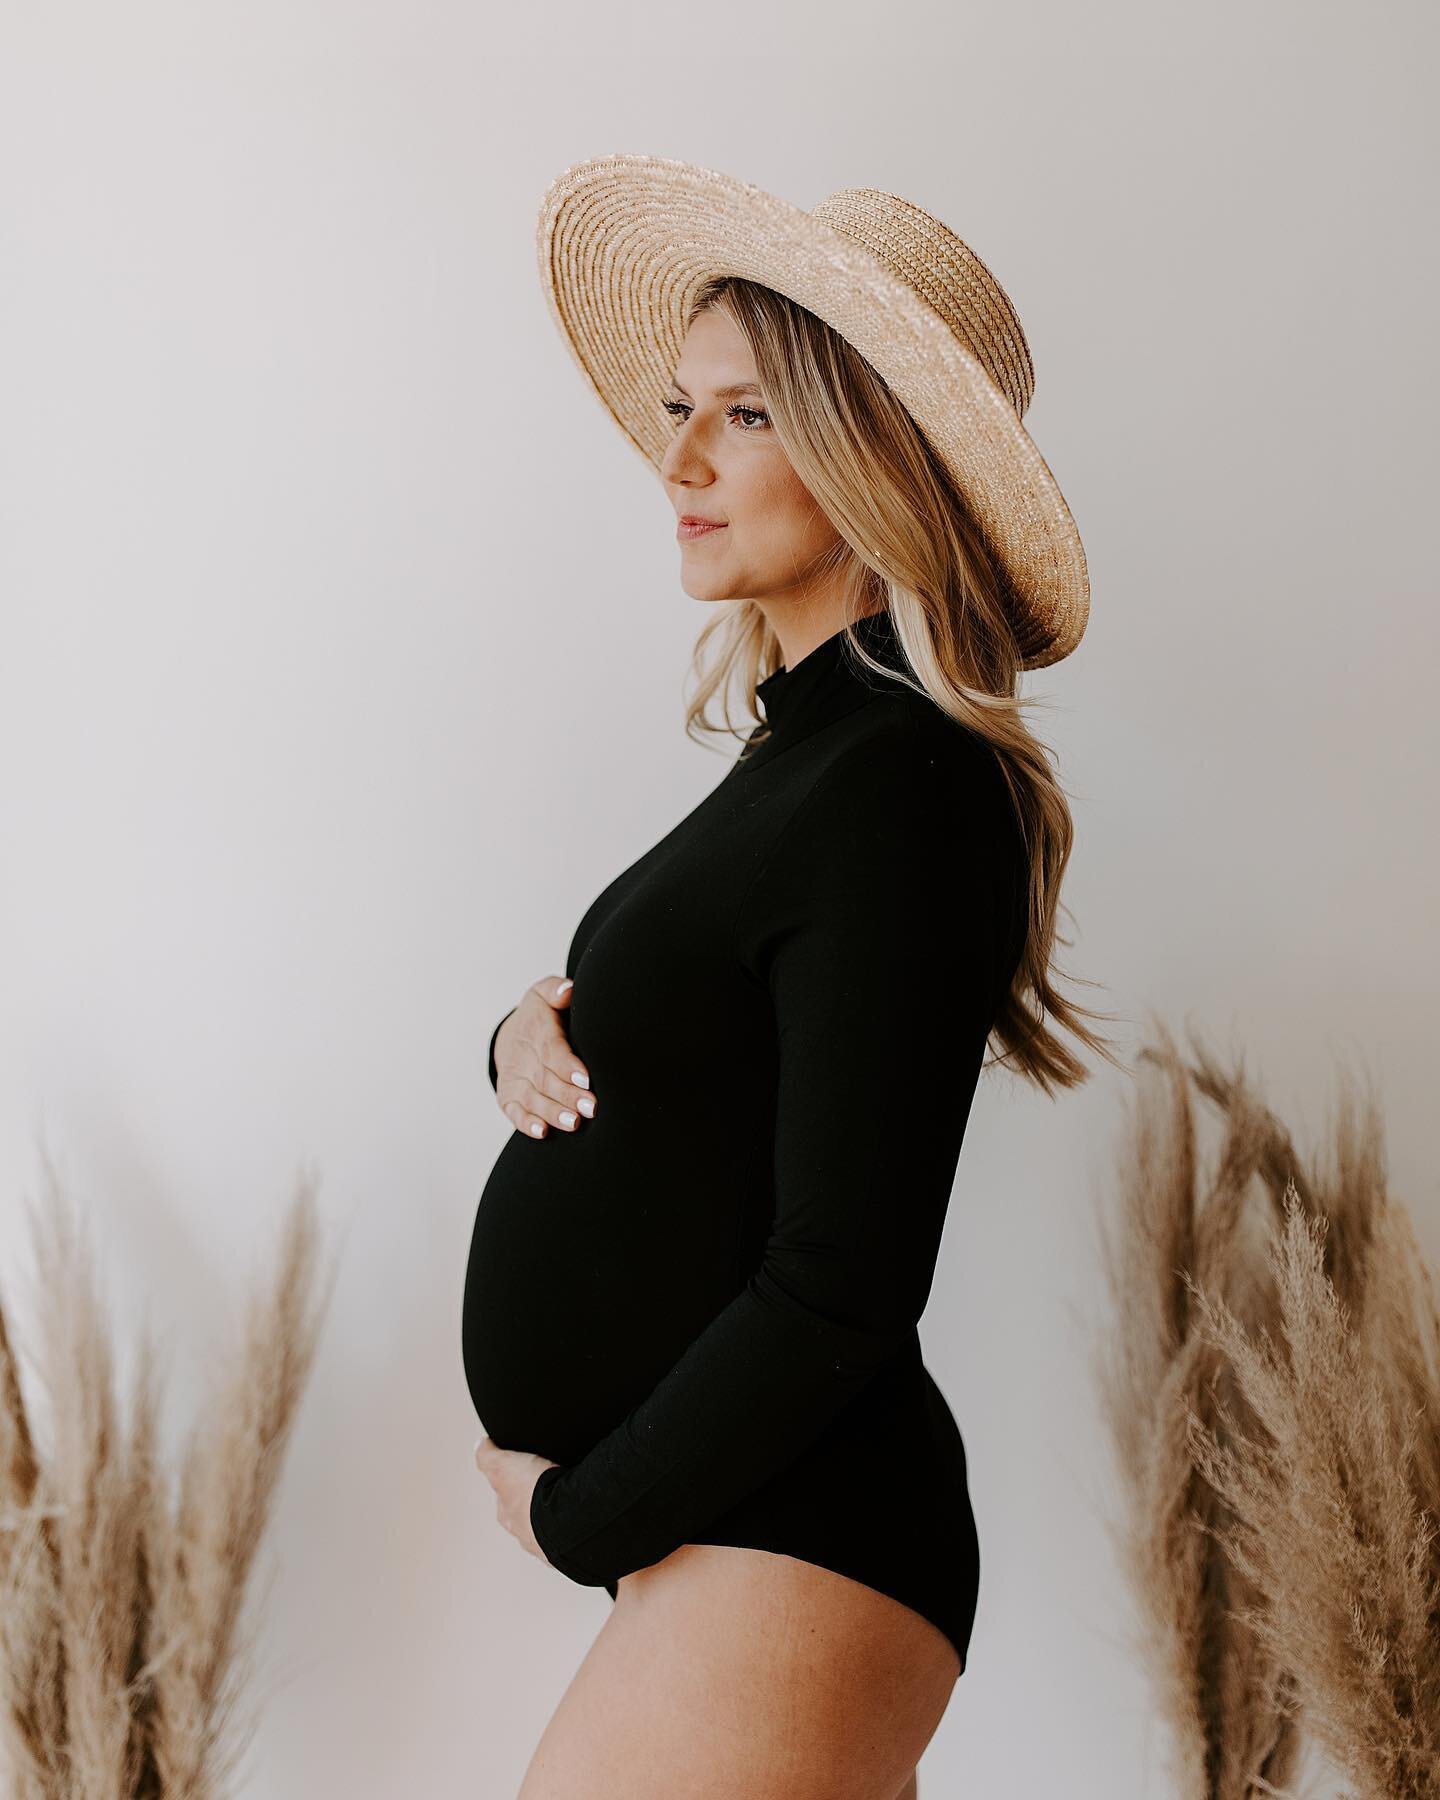 elise&rsquo;s maternity photos 🌾 sweet babe in the studio.